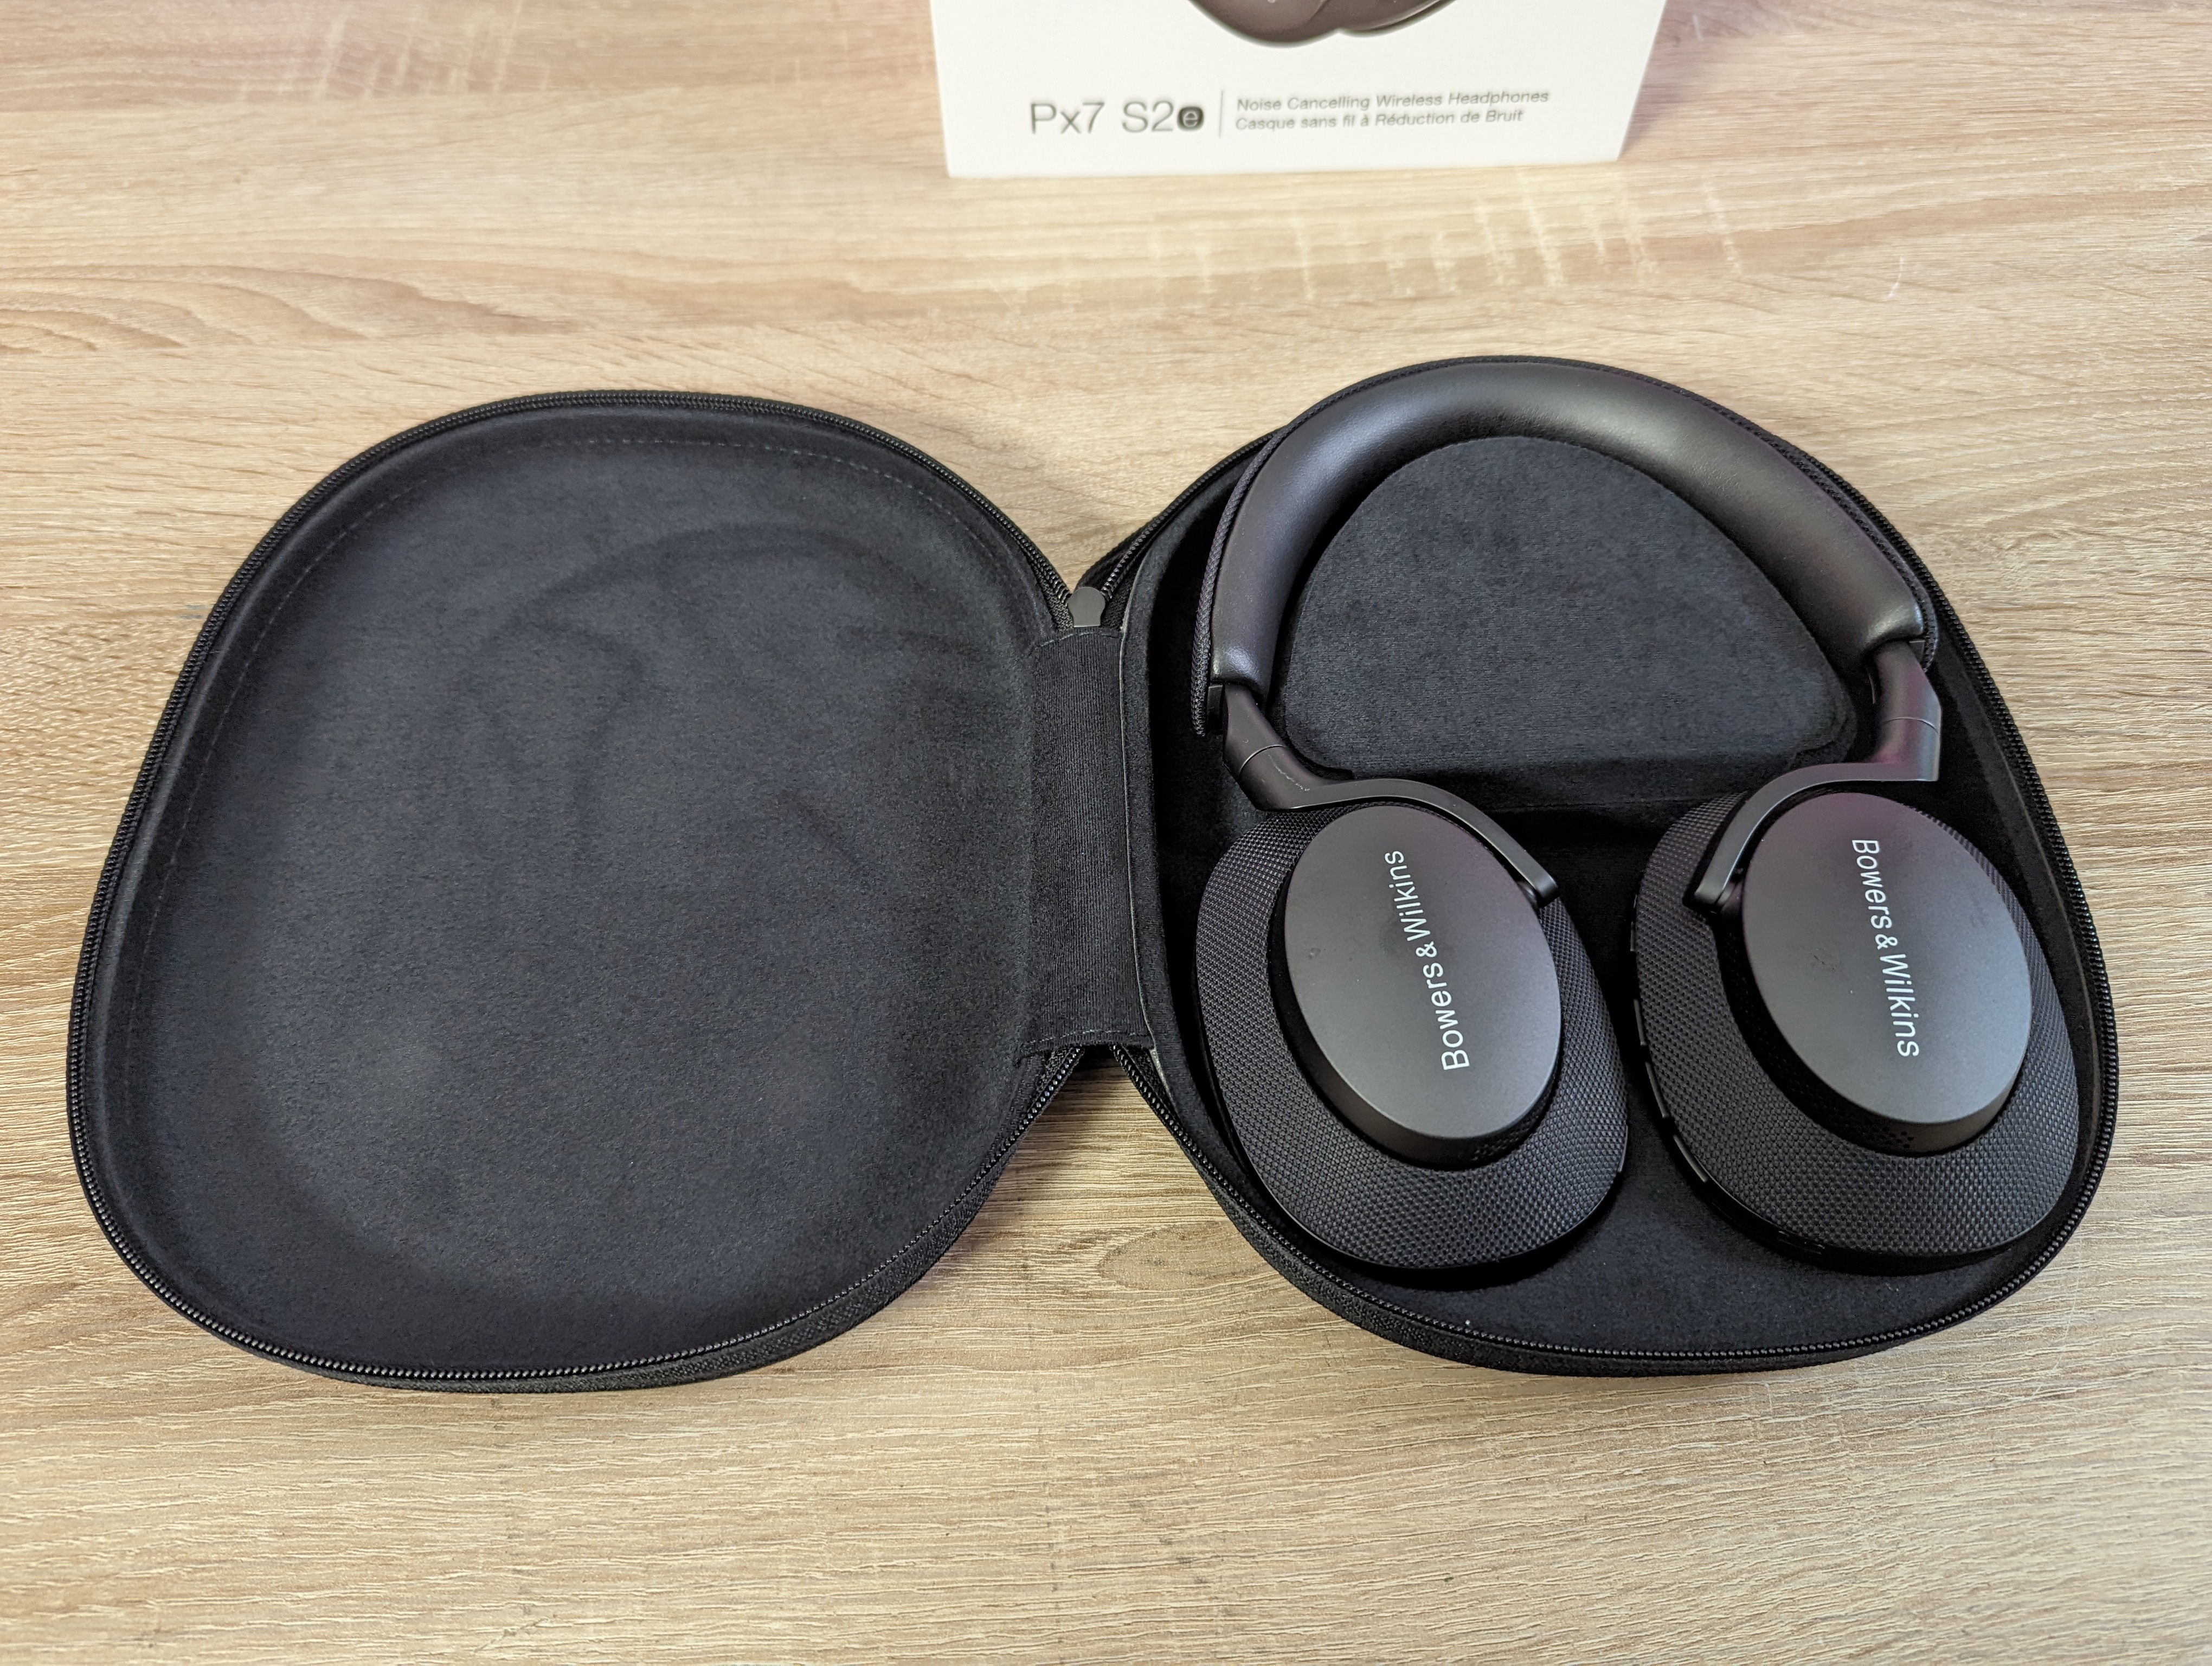 Case for Bowers & Wilkins Px7 S2e.jpg